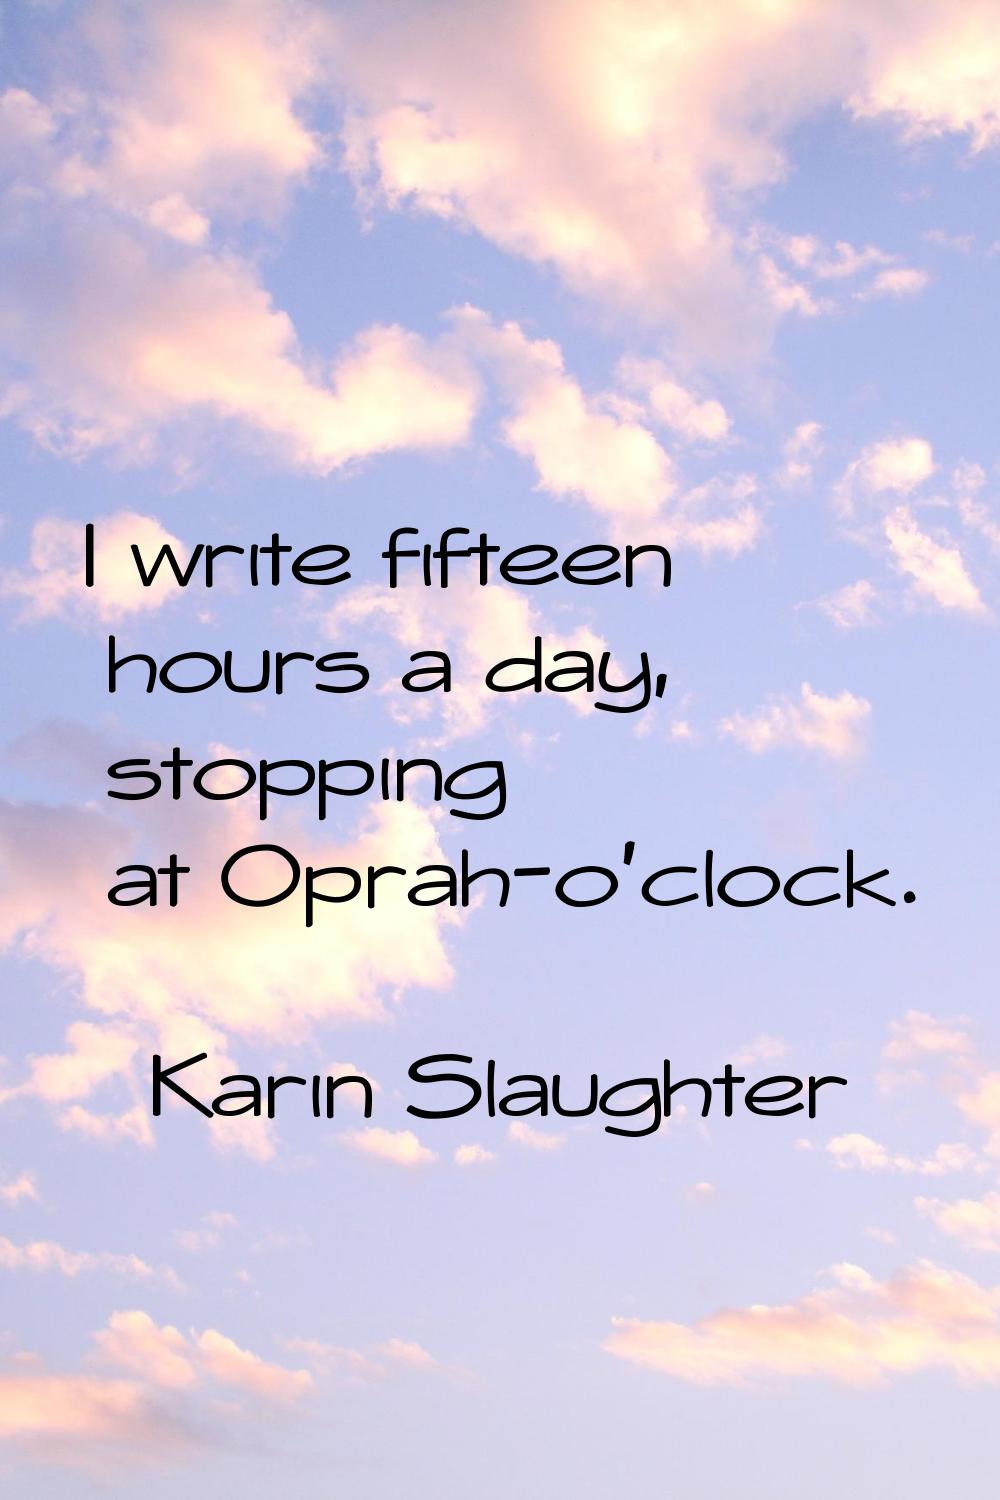 I write fifteen hours a day, stopping at Oprah-o'clock.